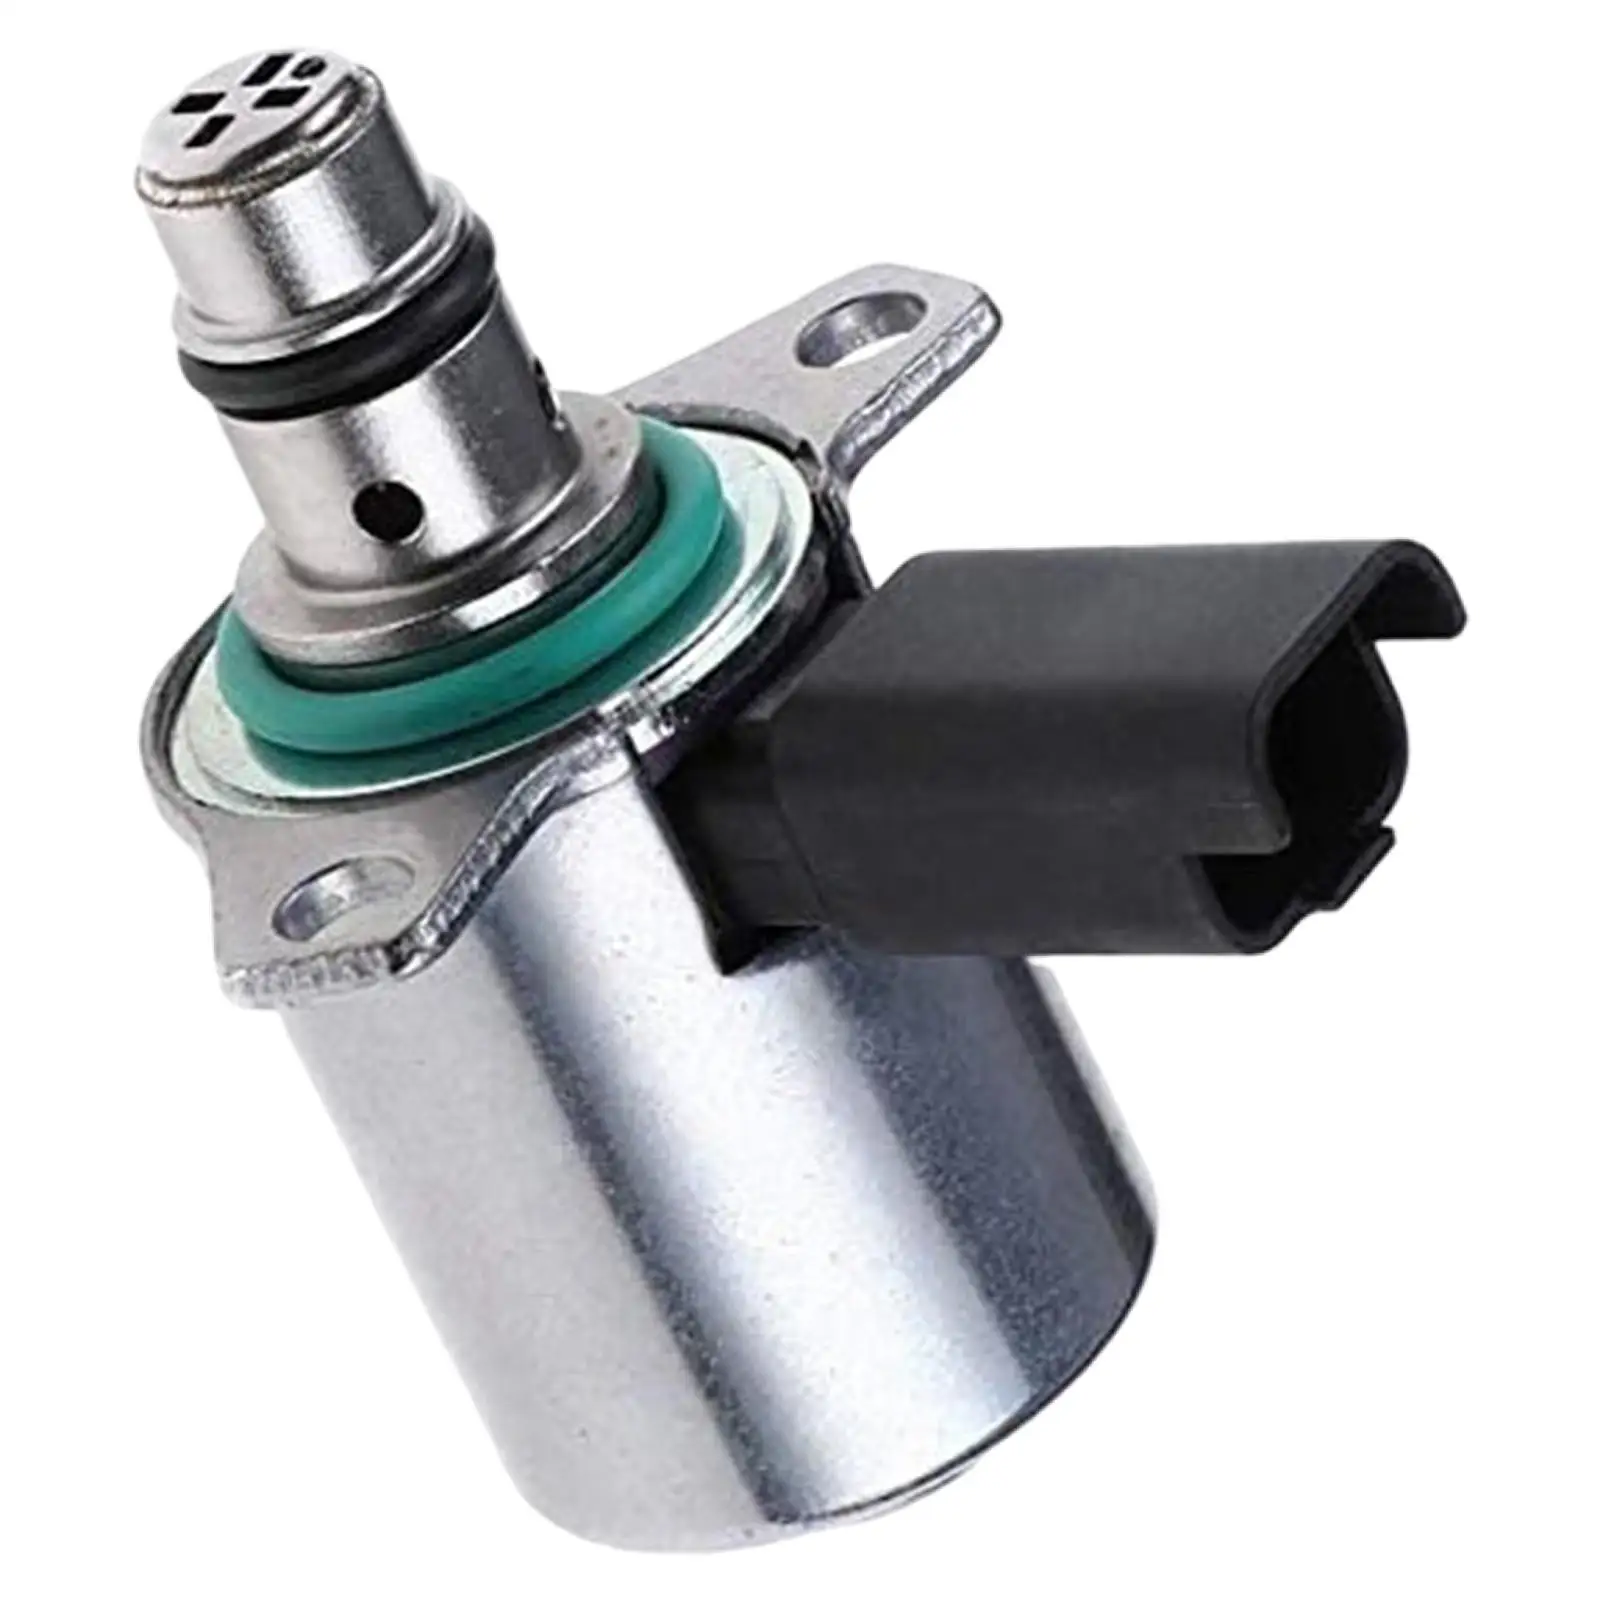 Car Fuel Pump Suction Control Valve BK2Q9358AA Fits for Ford FB3Q9358AA 1 793 473 1717702 Durable 5WS40697 1793473